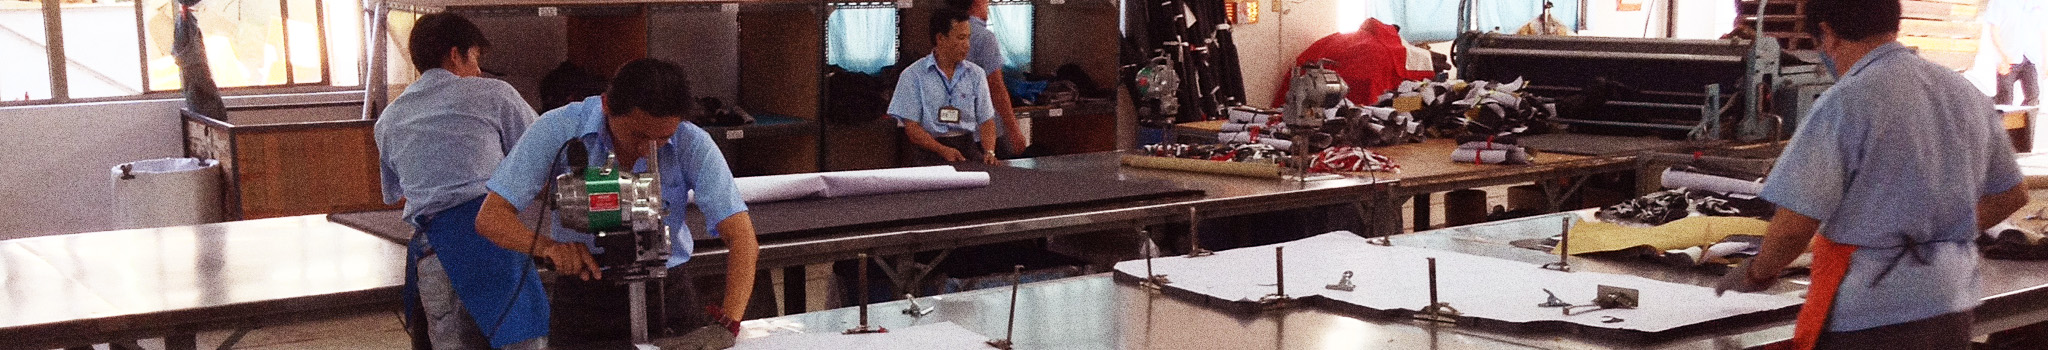 Five factory workers wearing blue shirts cutting material on cutting table